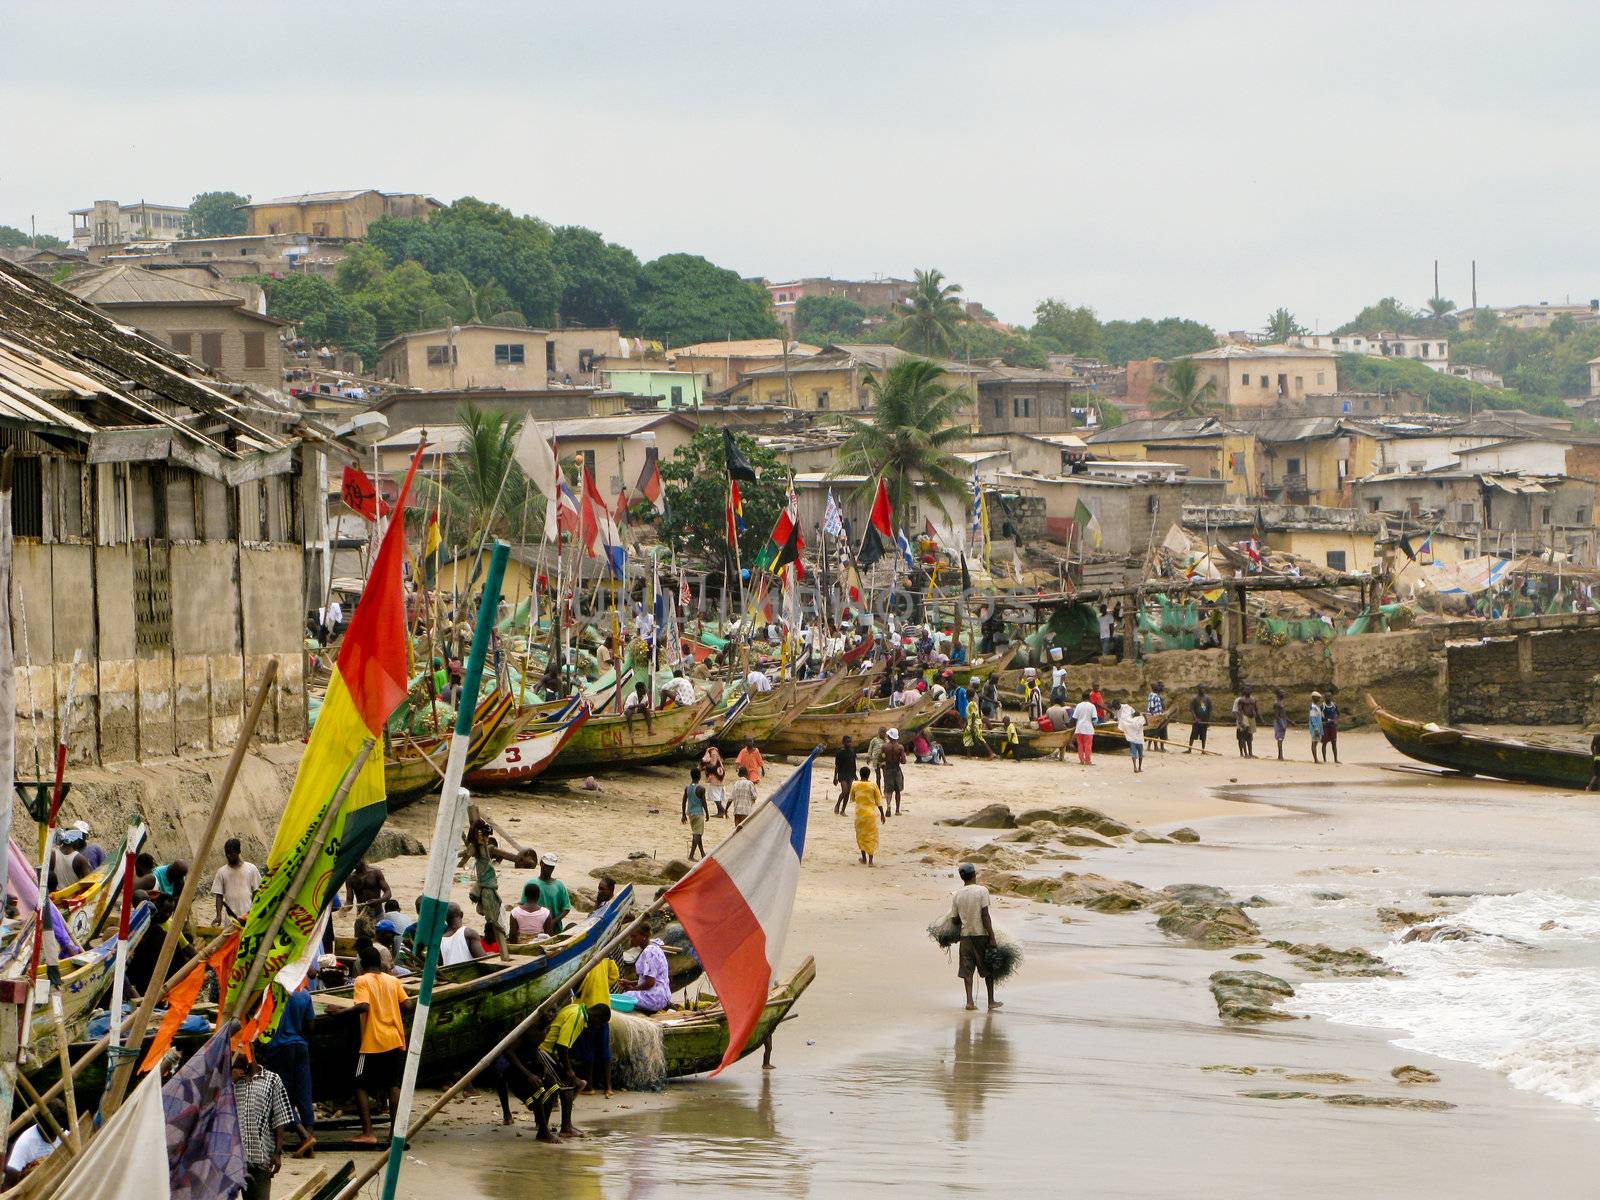 Beach and boats by the sea at Cape Coast near Accra in Ghana